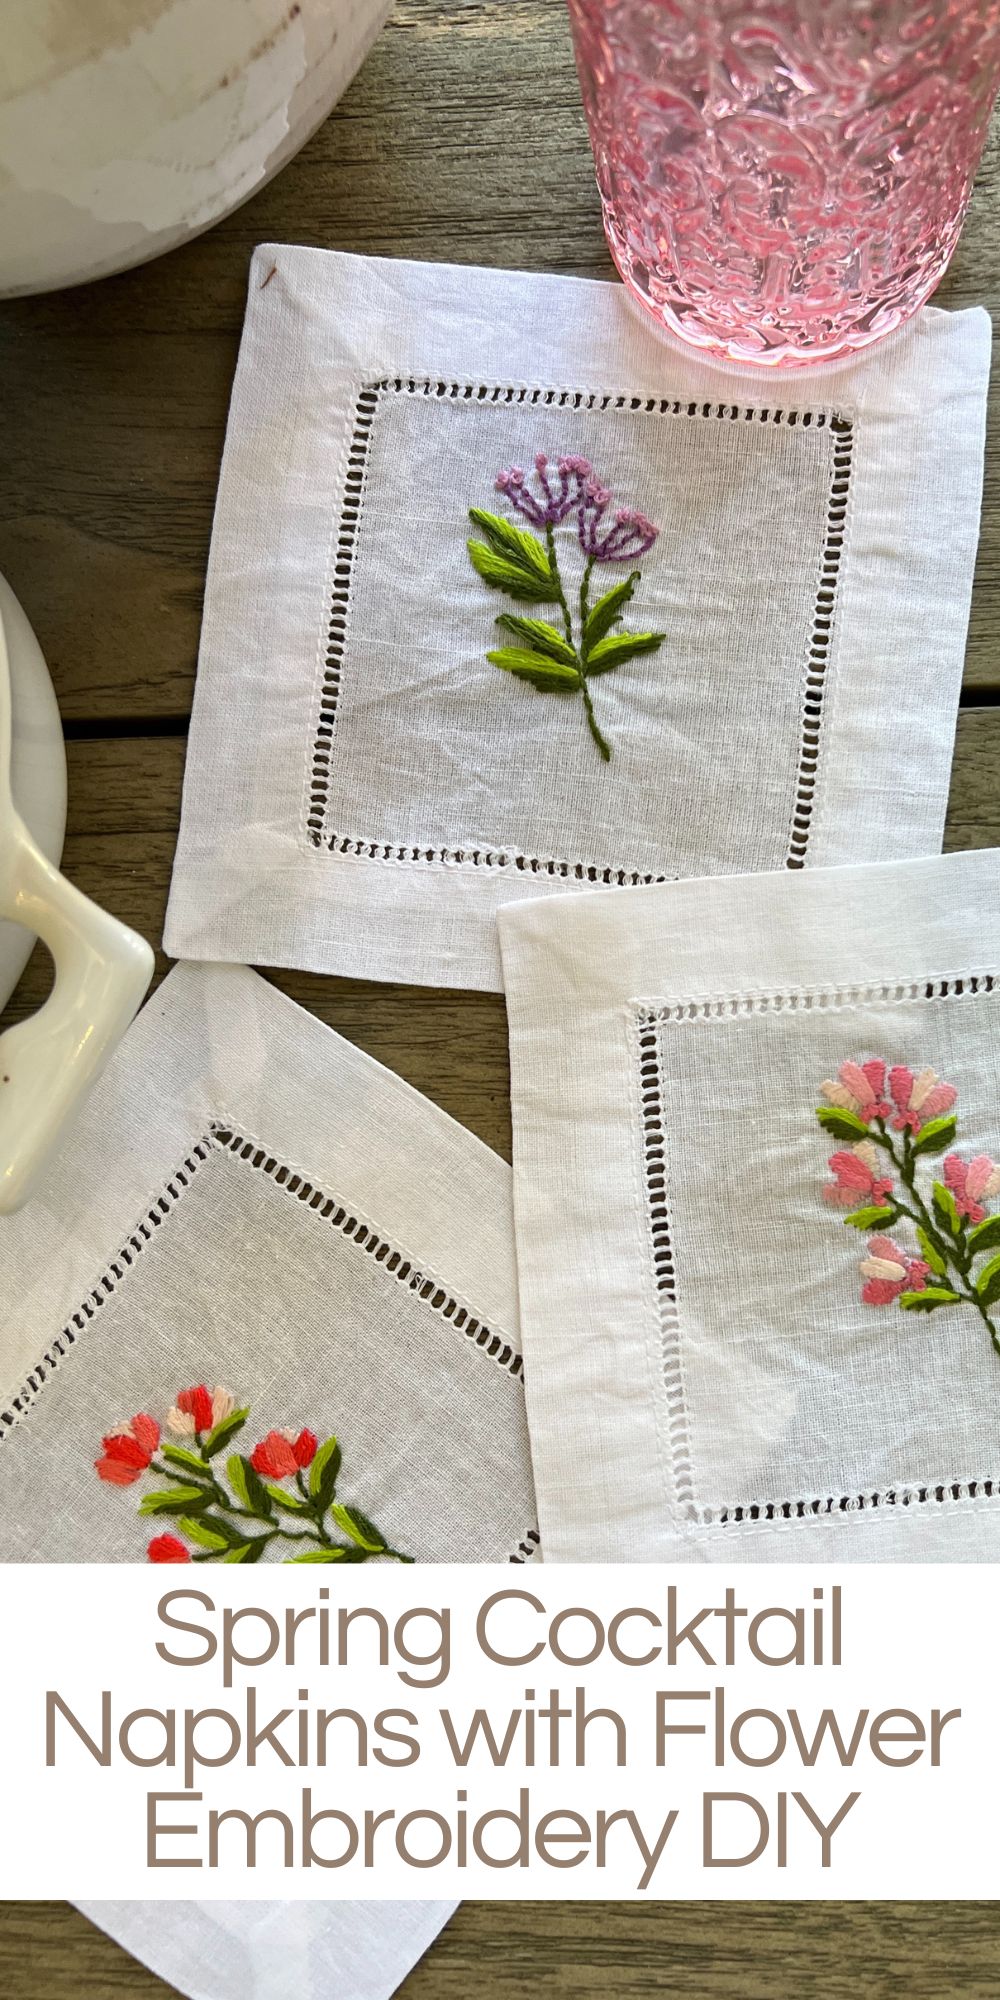 I am very excited about these DIY spring cocktail napkins with flower embroidery. They are the perfect budget-friendly spring craft.